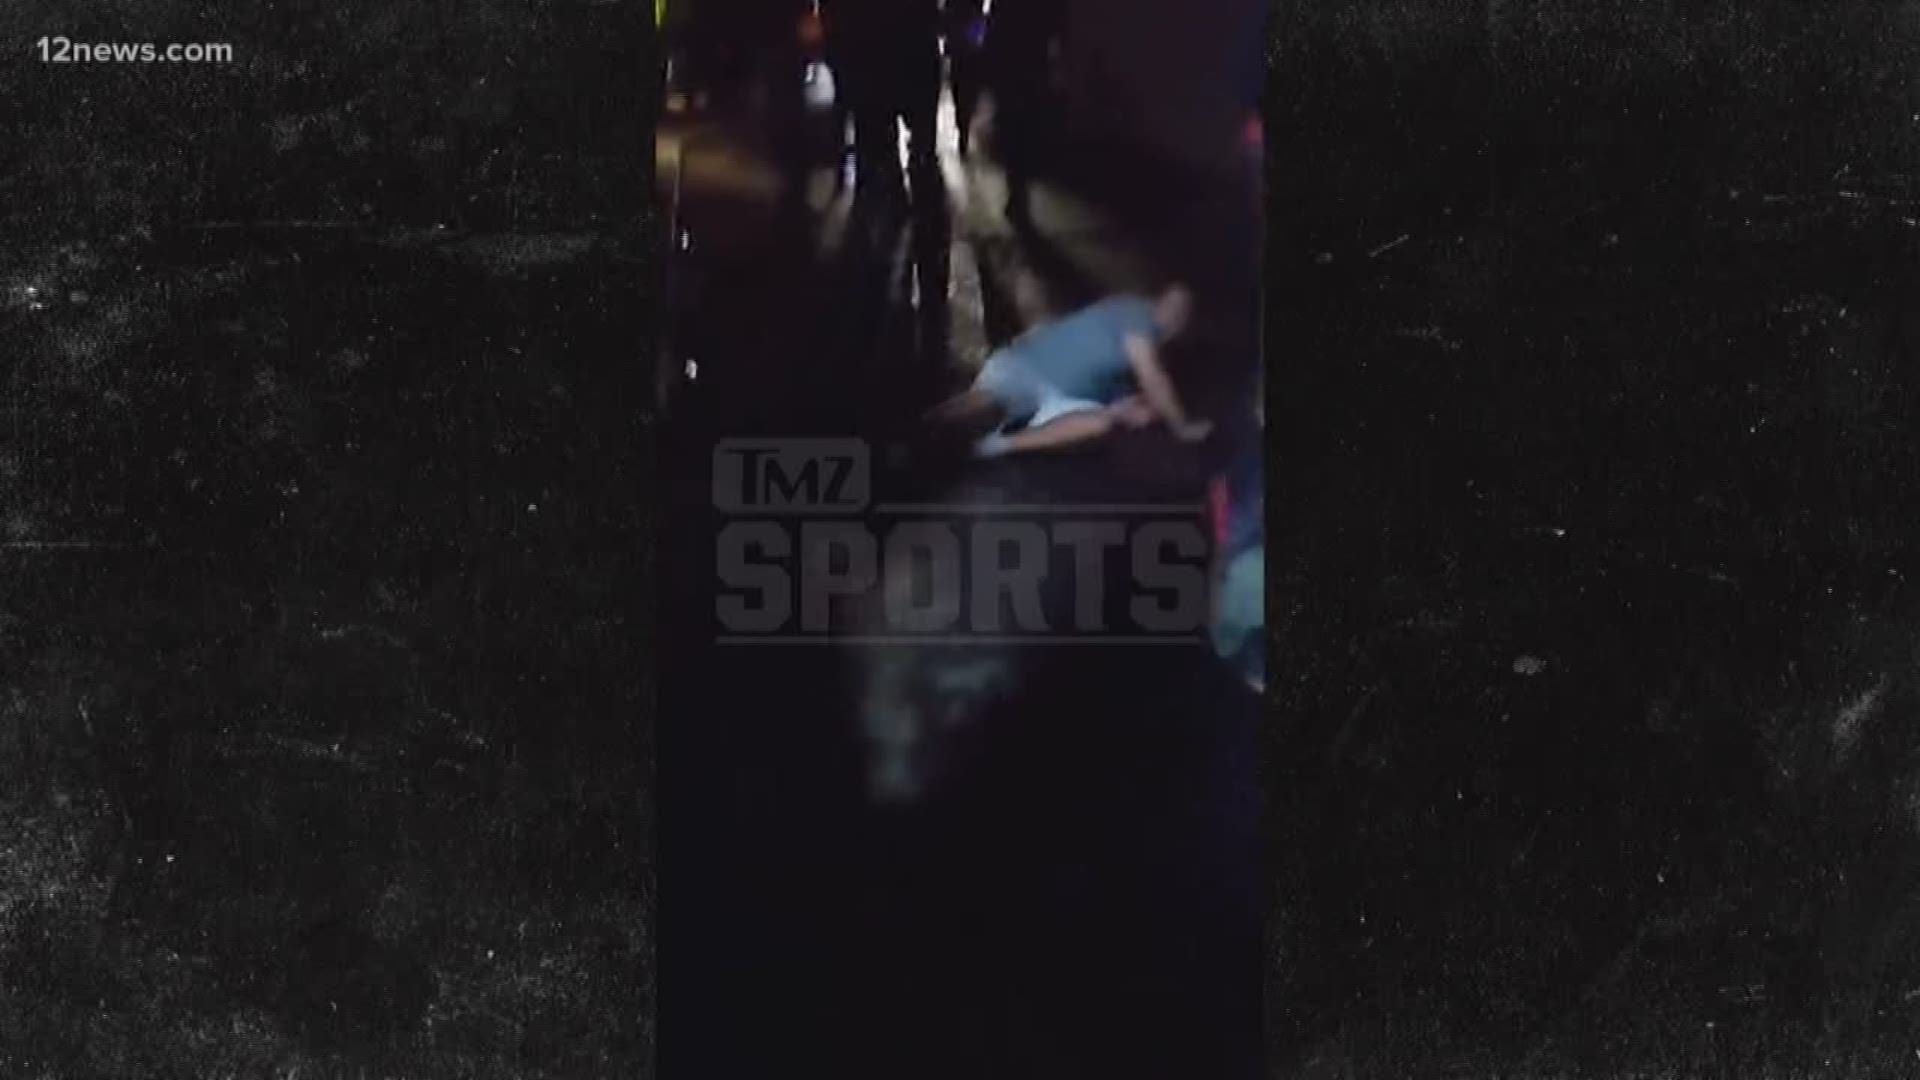 The alleged incident happened in Scottsdale Saturday night when a member of Harden's entourage got into a fight. Harden noticed the woman recording and demanded that she stop.